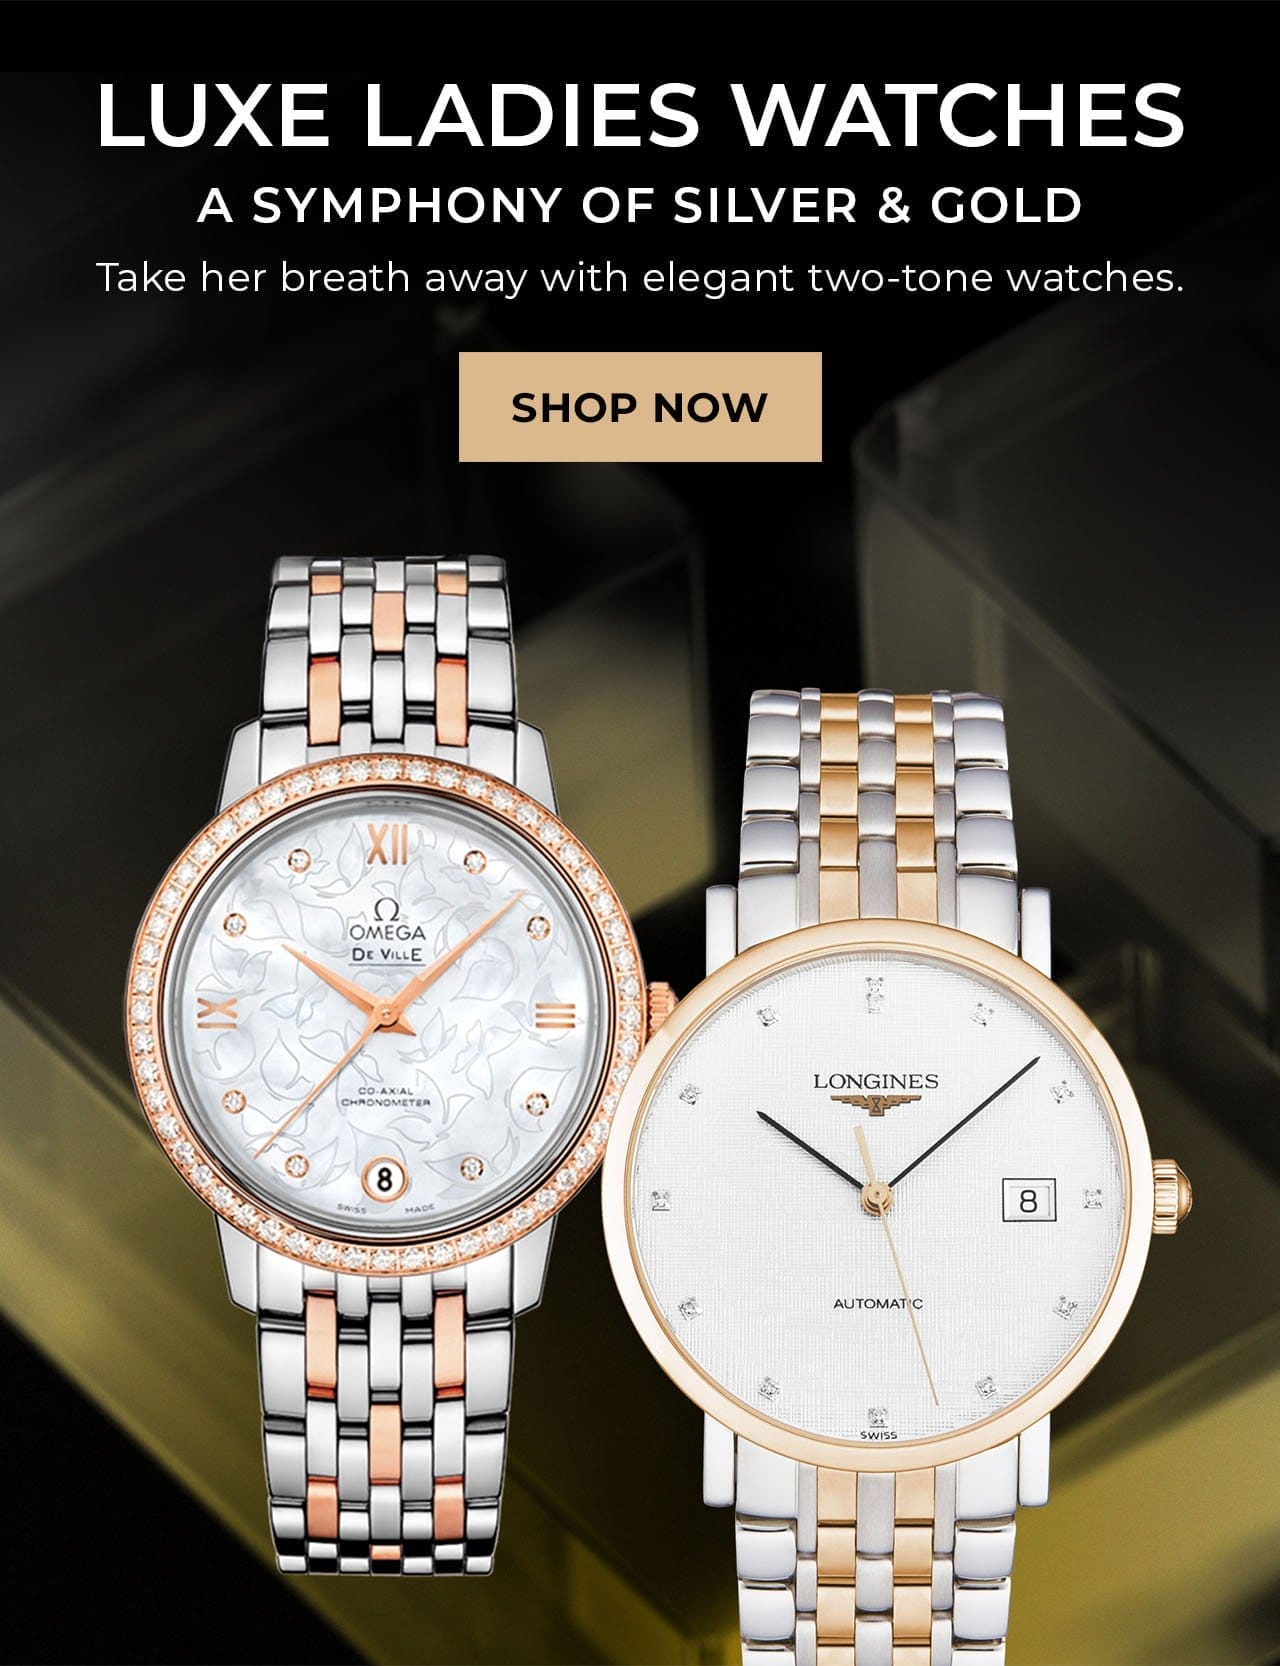 Luxe Ladies Watches | SHOP NOW